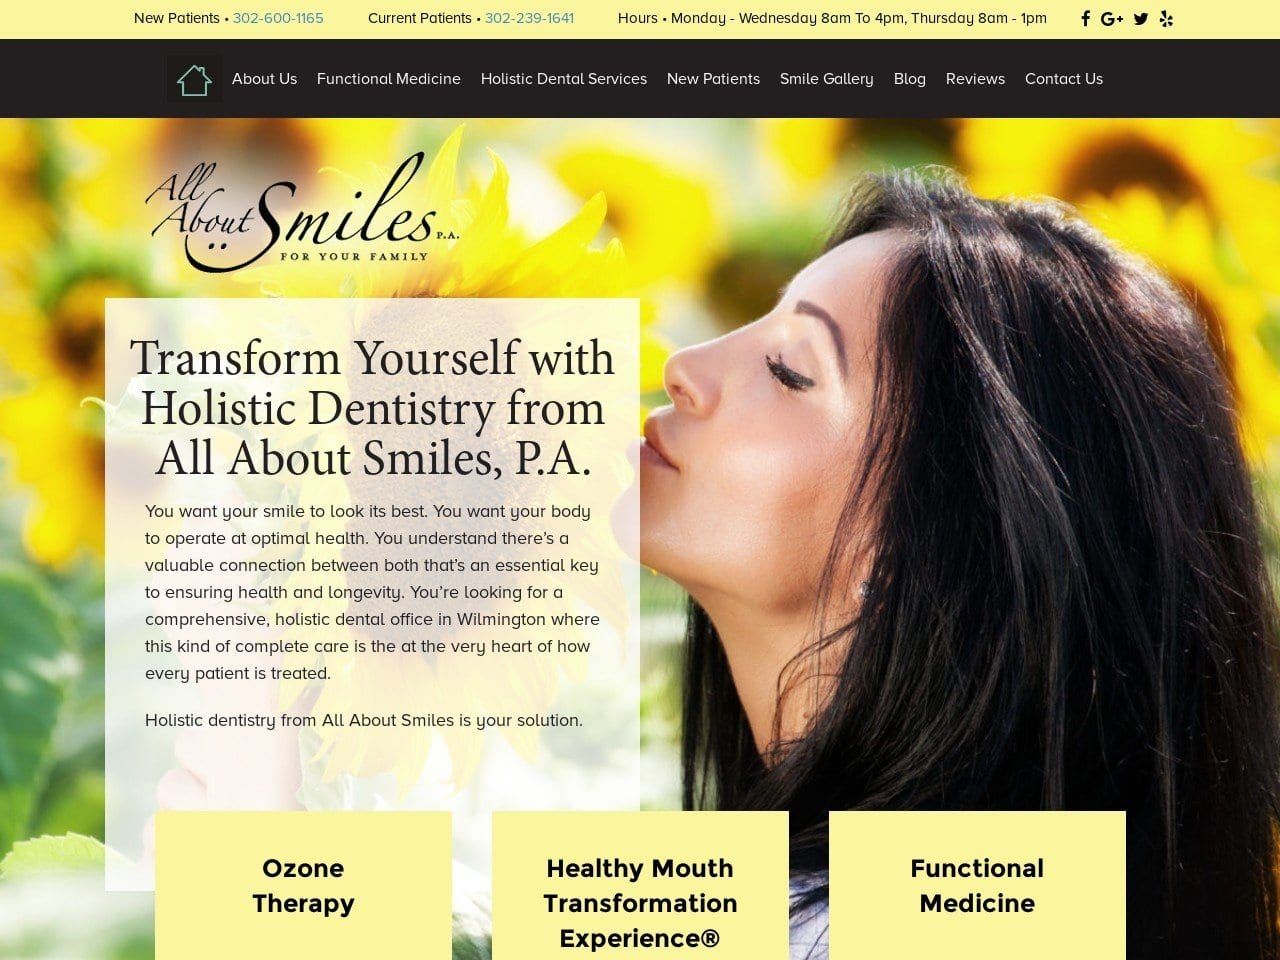 All About Smiles Website Screenshot from allaboutsmilesde.com